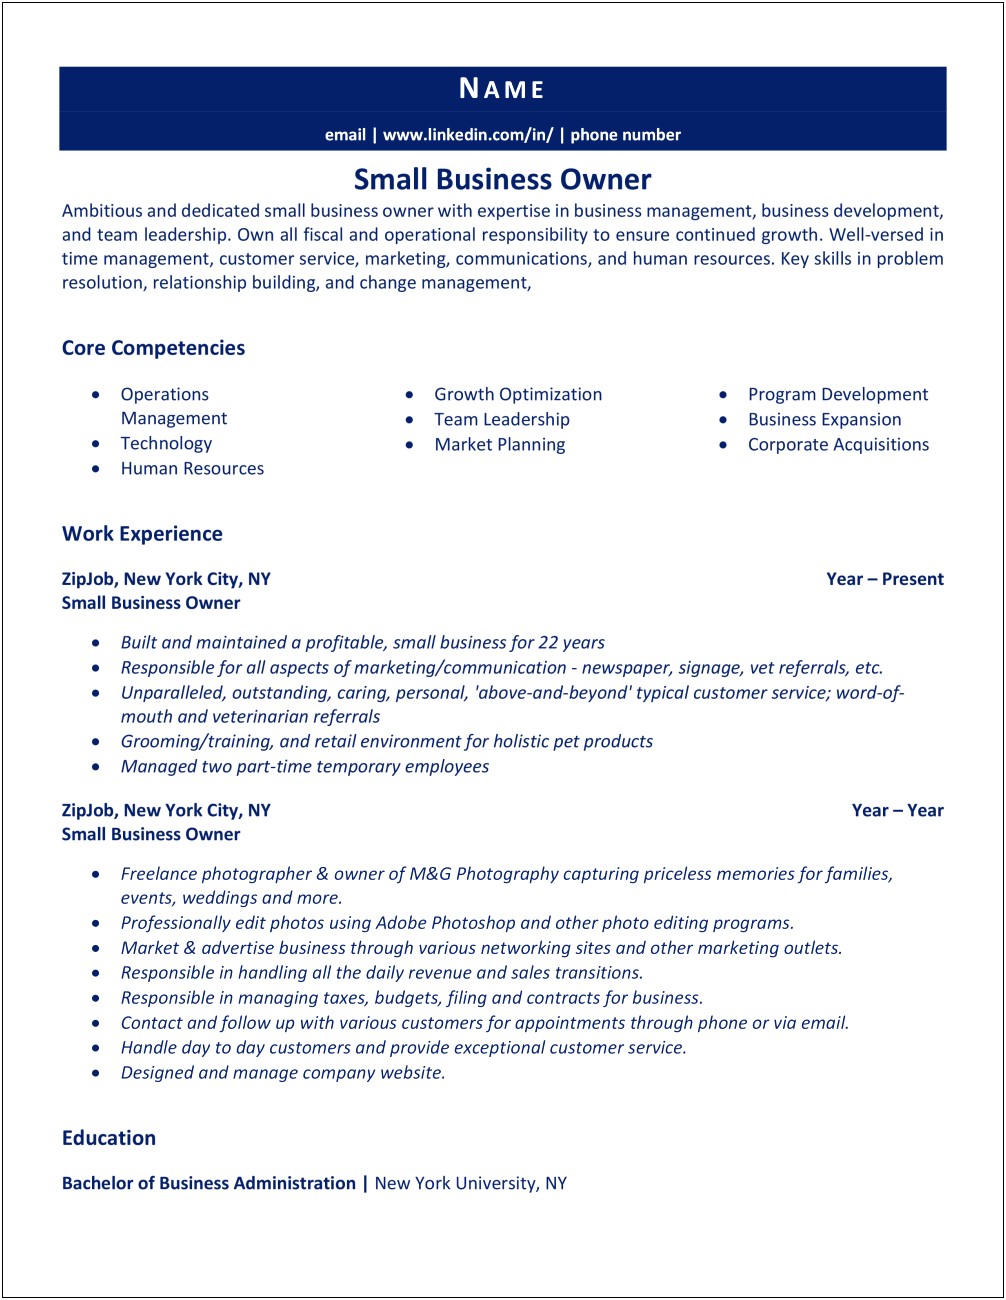 Should I Put Small Business Ownership On Resume